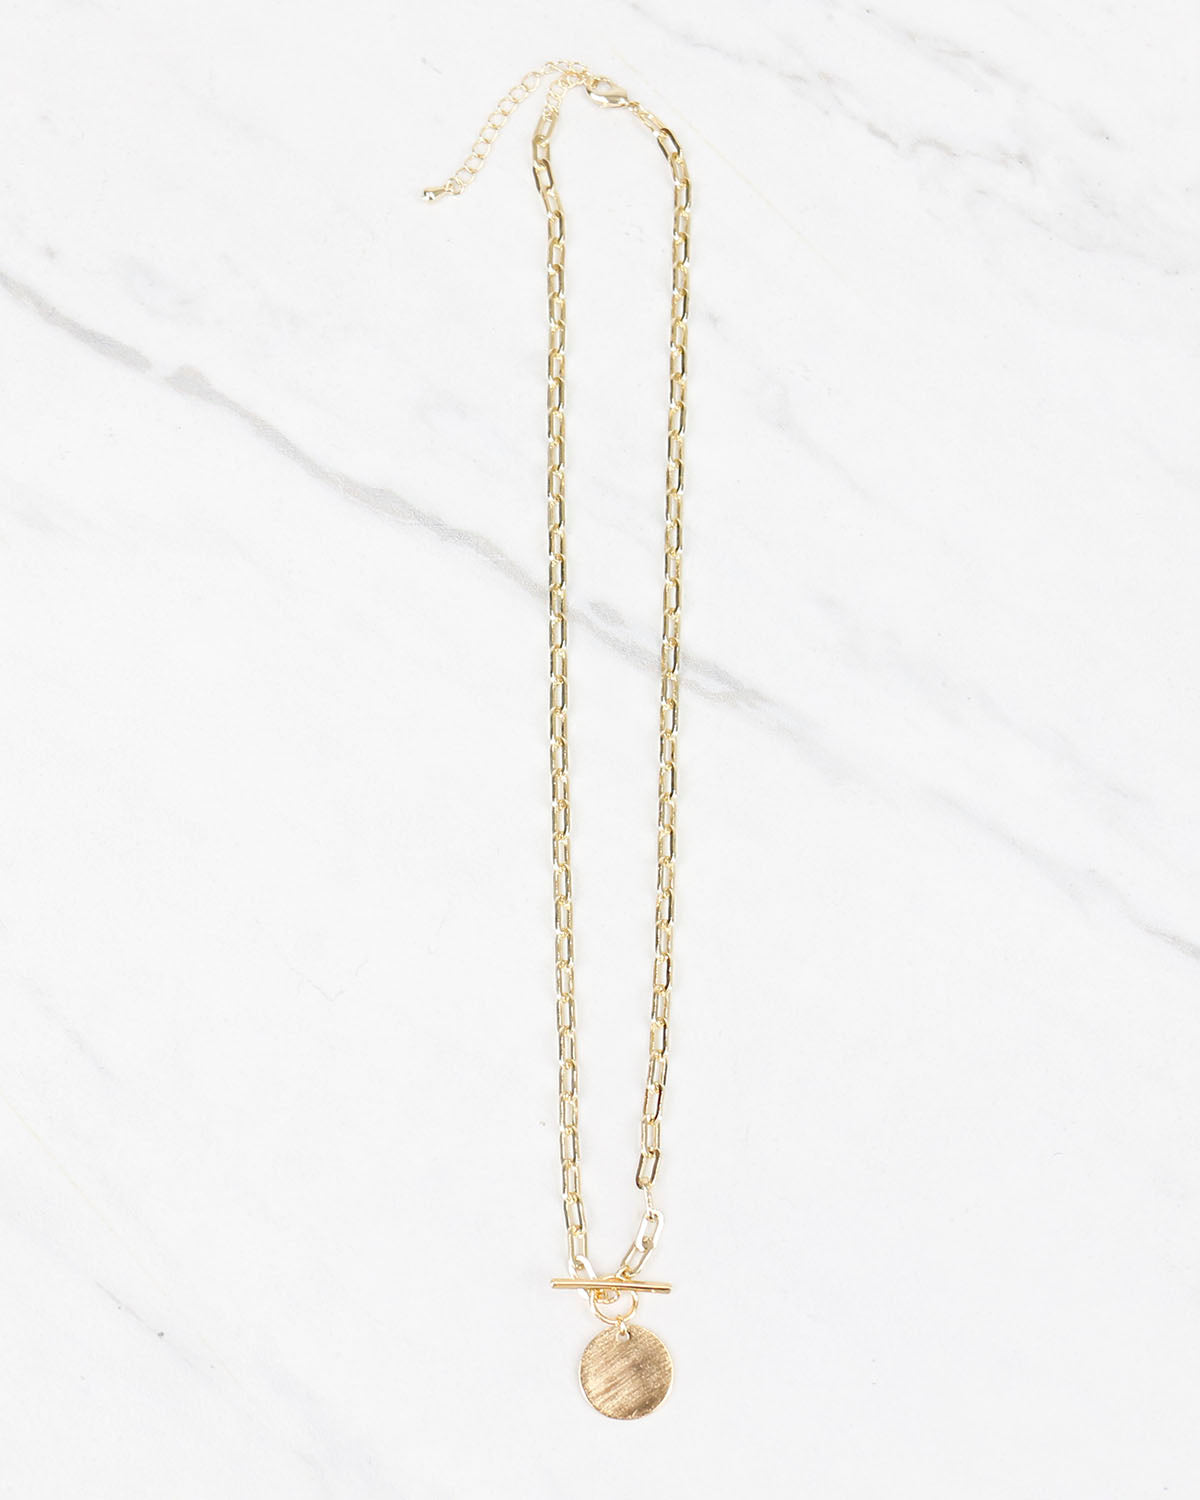 Ring & Bar Pendant Necklace in Gold